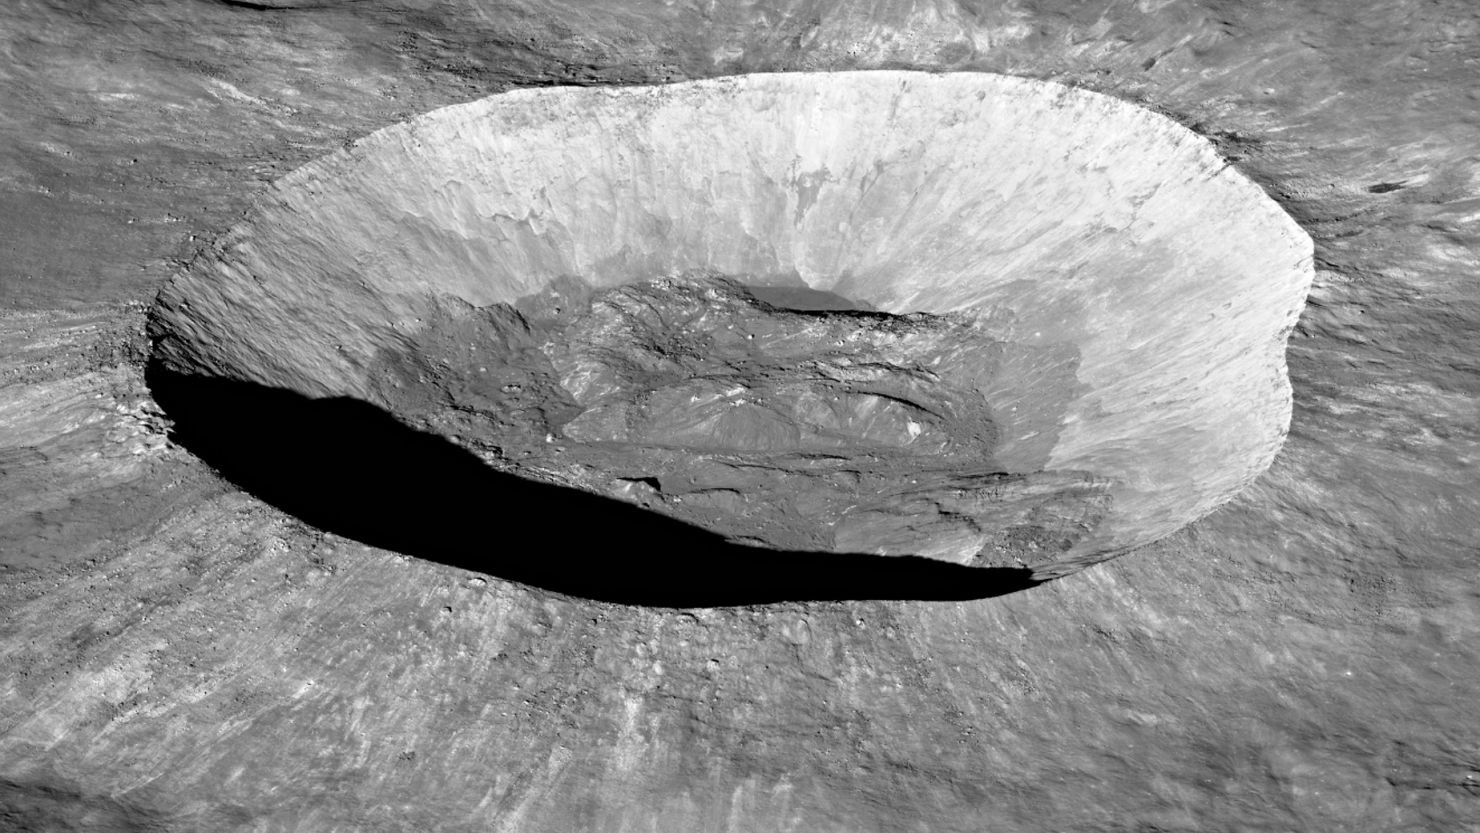 NASA's Lunar Reconnaissance Orbiter captured an image of the Giordano Bruno crater on the moon's far side, showcasing the height and sharpness of the rim as well as rolling hills along the crater floor.